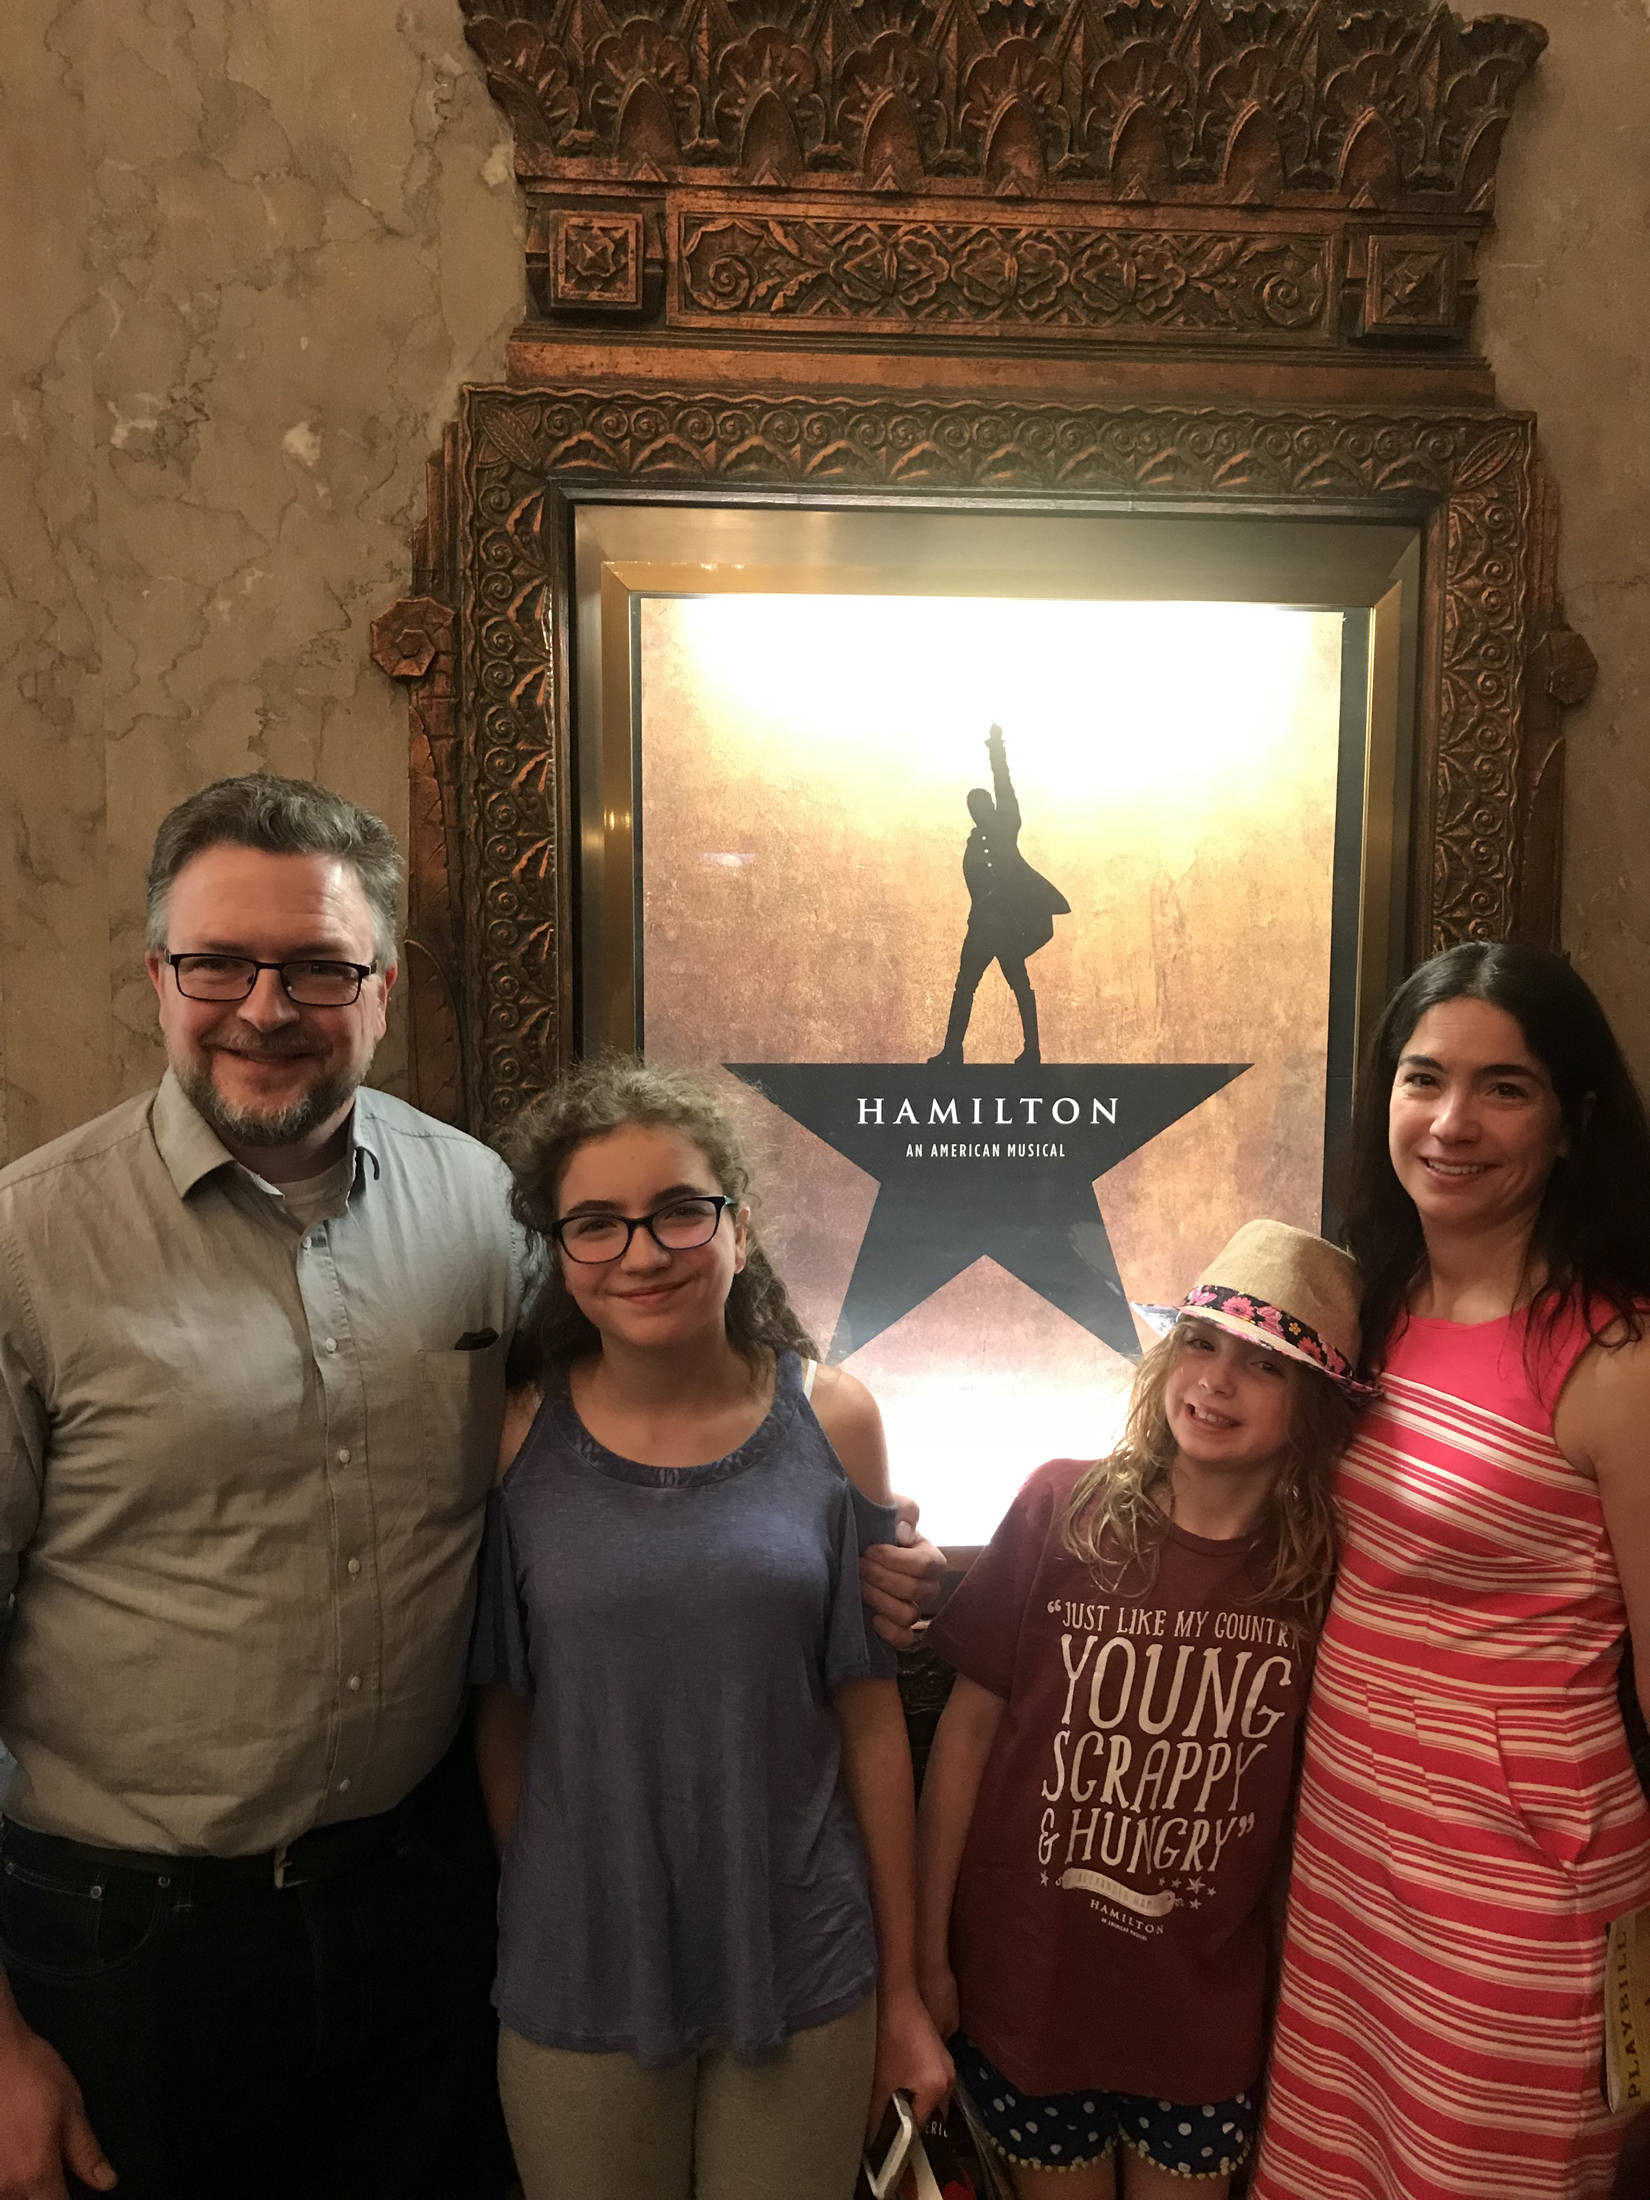 The author, Clint J. Farr, and family attend the play “Hamilton” at Pantages Theatre in Los Angeles. Coincidentally, the author transmogrified into his grandfather that very same weekend. Courtesy of Clint J. Farr